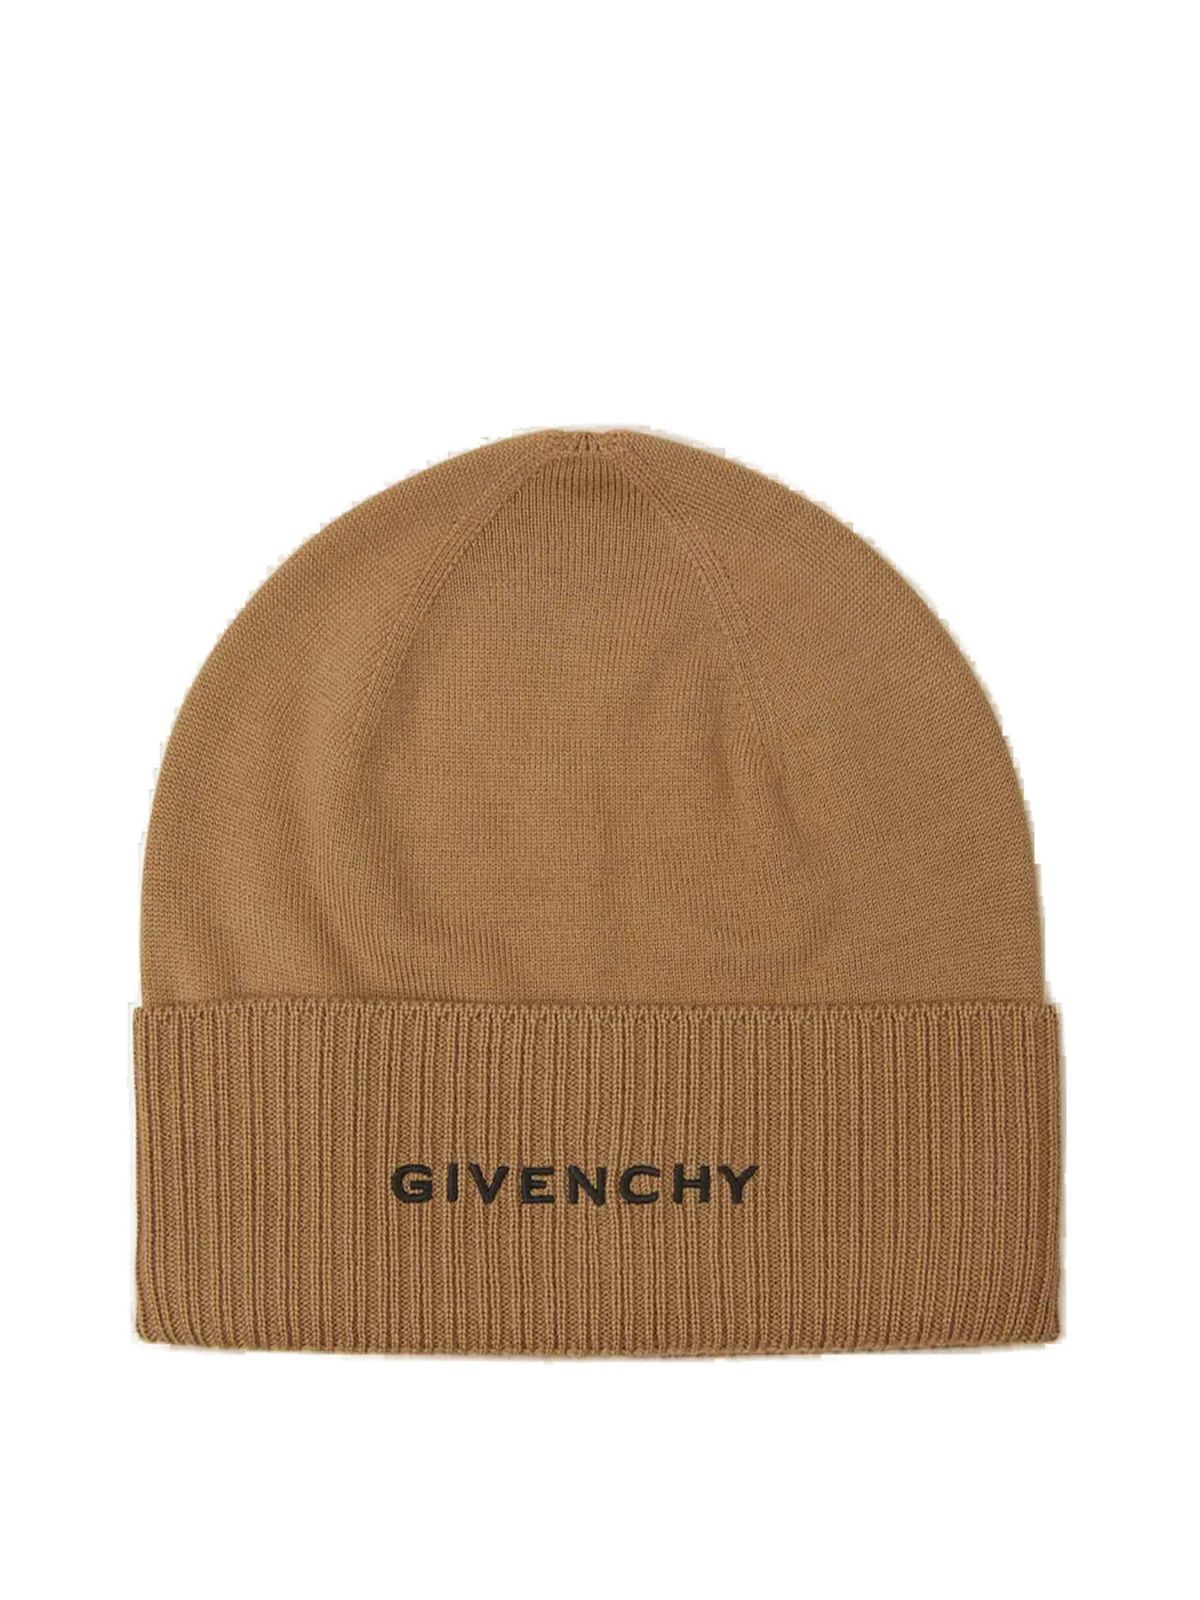 Givenchy Logo Embroidered Knit Beanie | Cettire Global